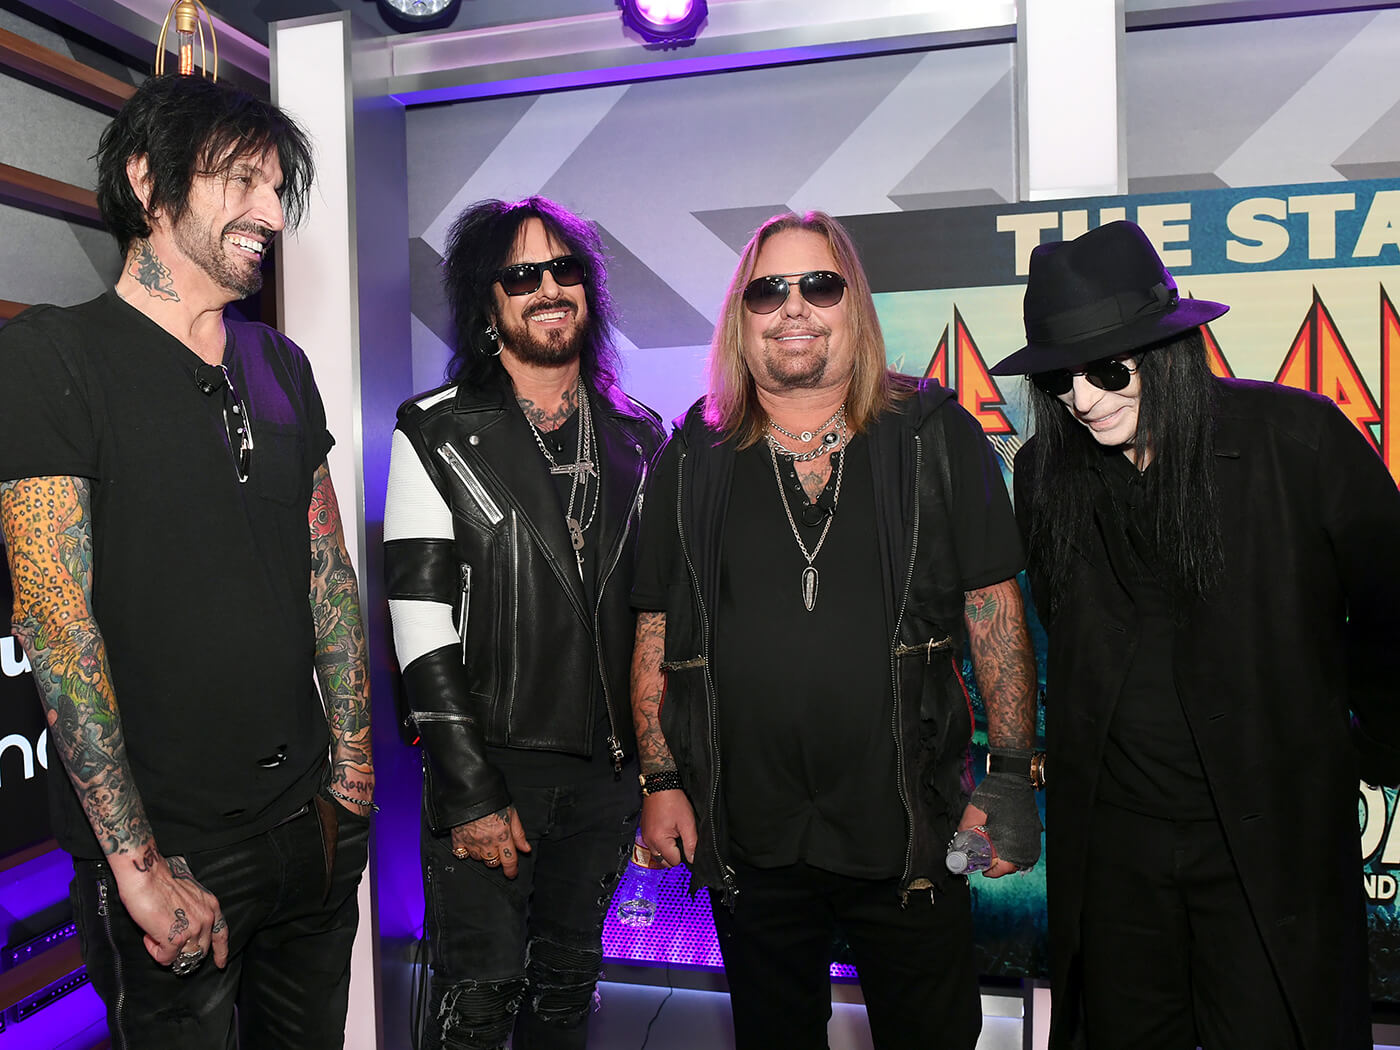 Mötley Crüe announce dates for The Stadium Tour with Def Leppard and Poison.